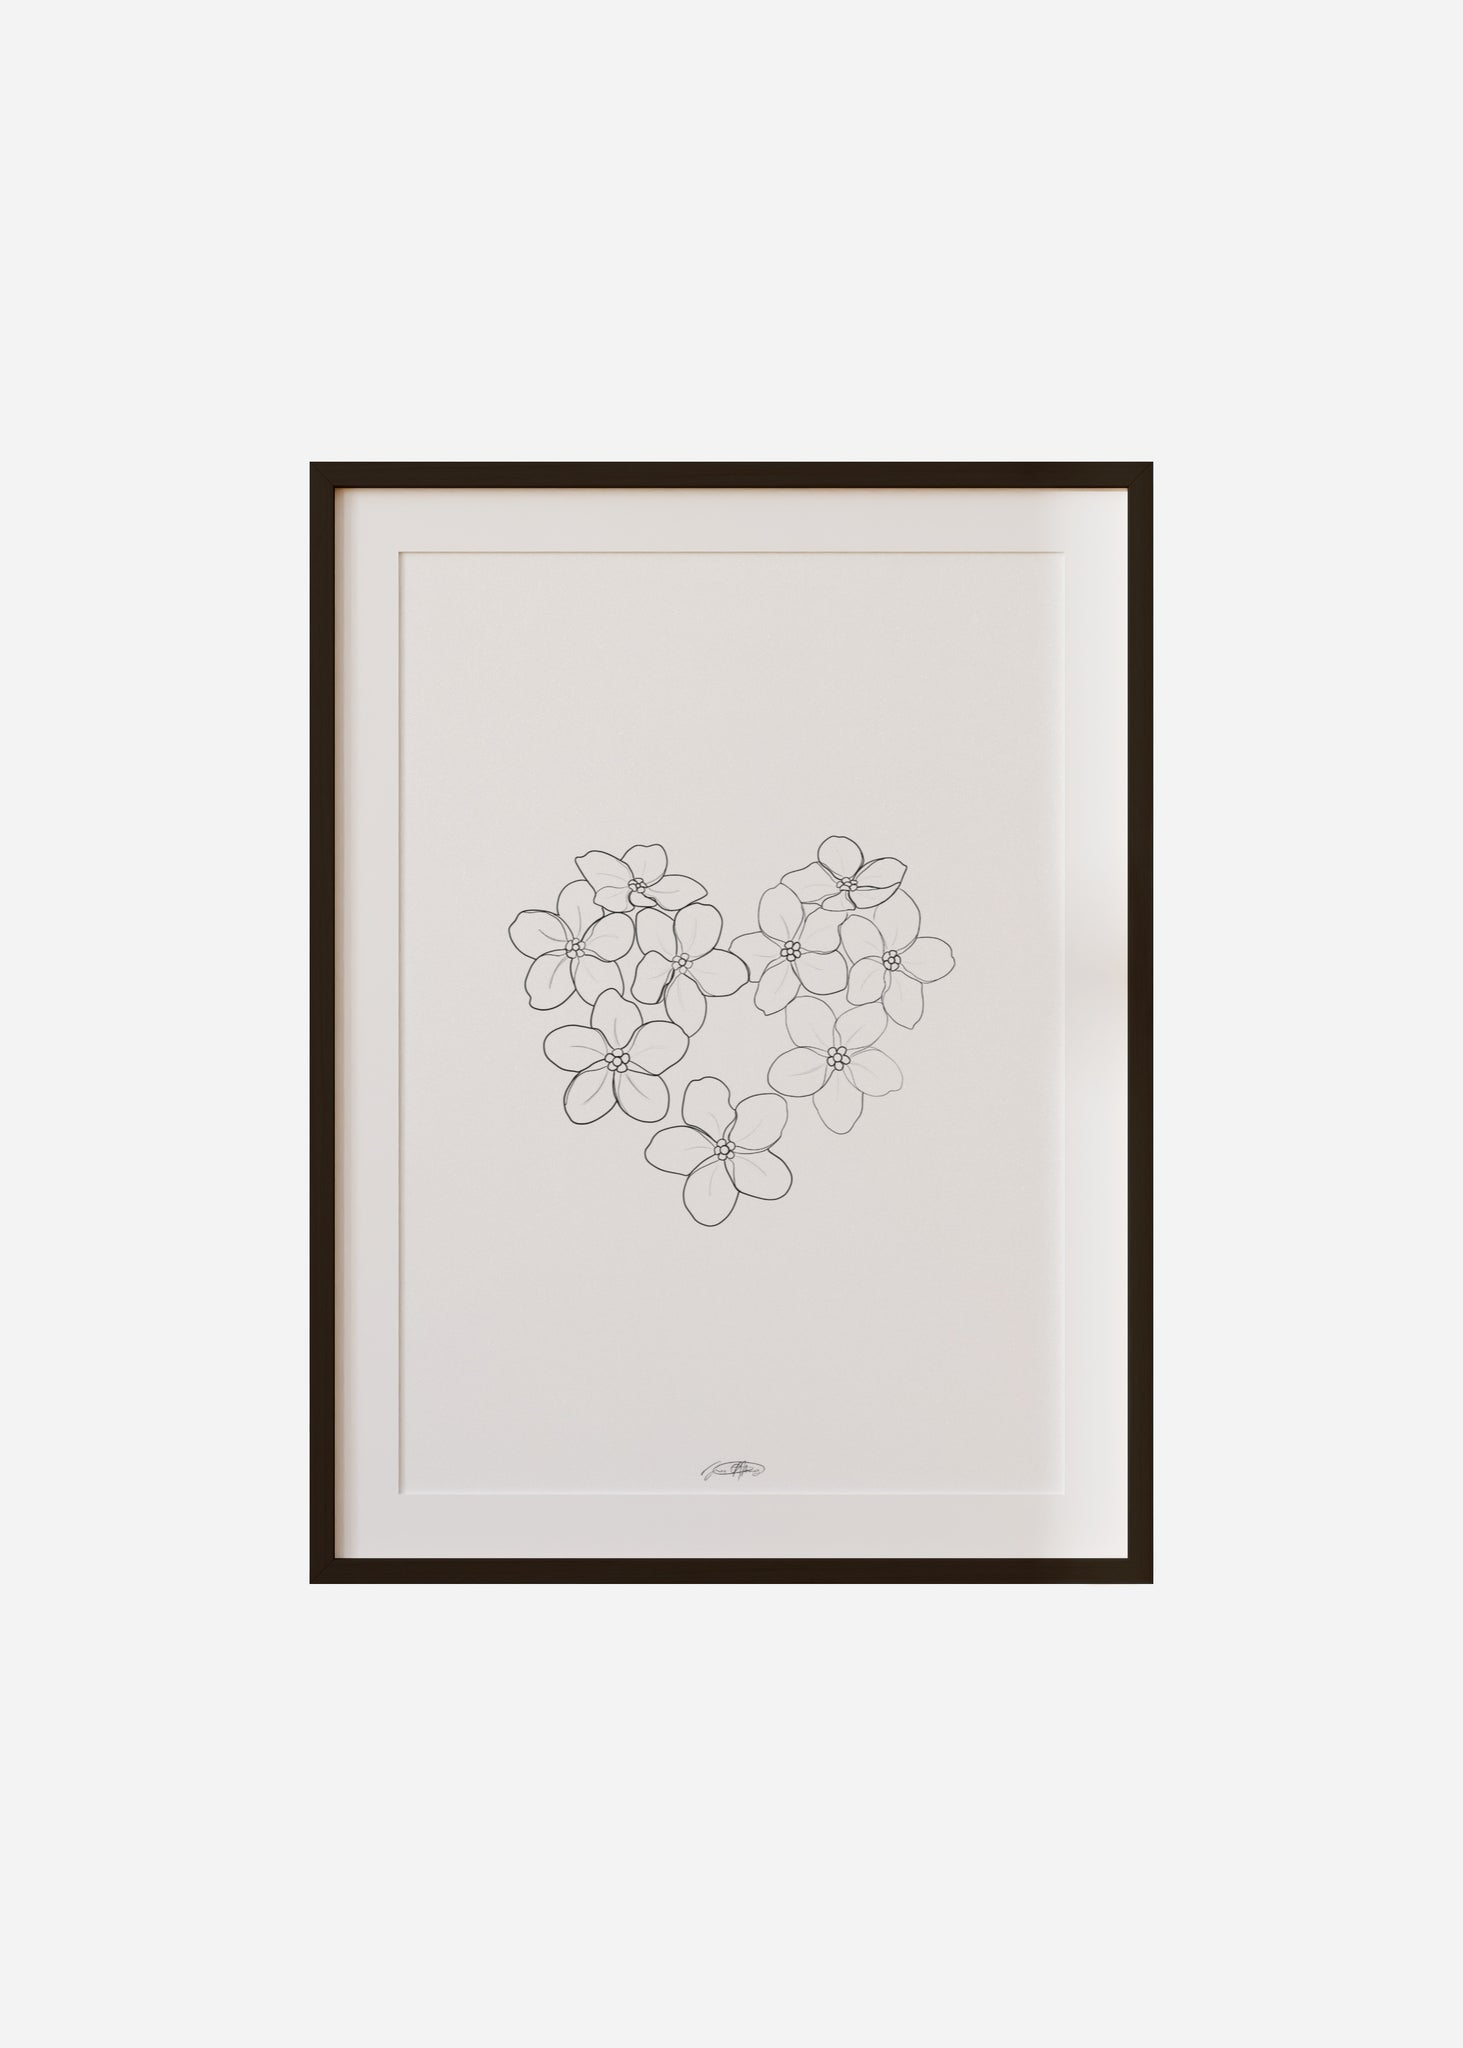 l'amour toujours / line art n.15 Framed & Mounted Print